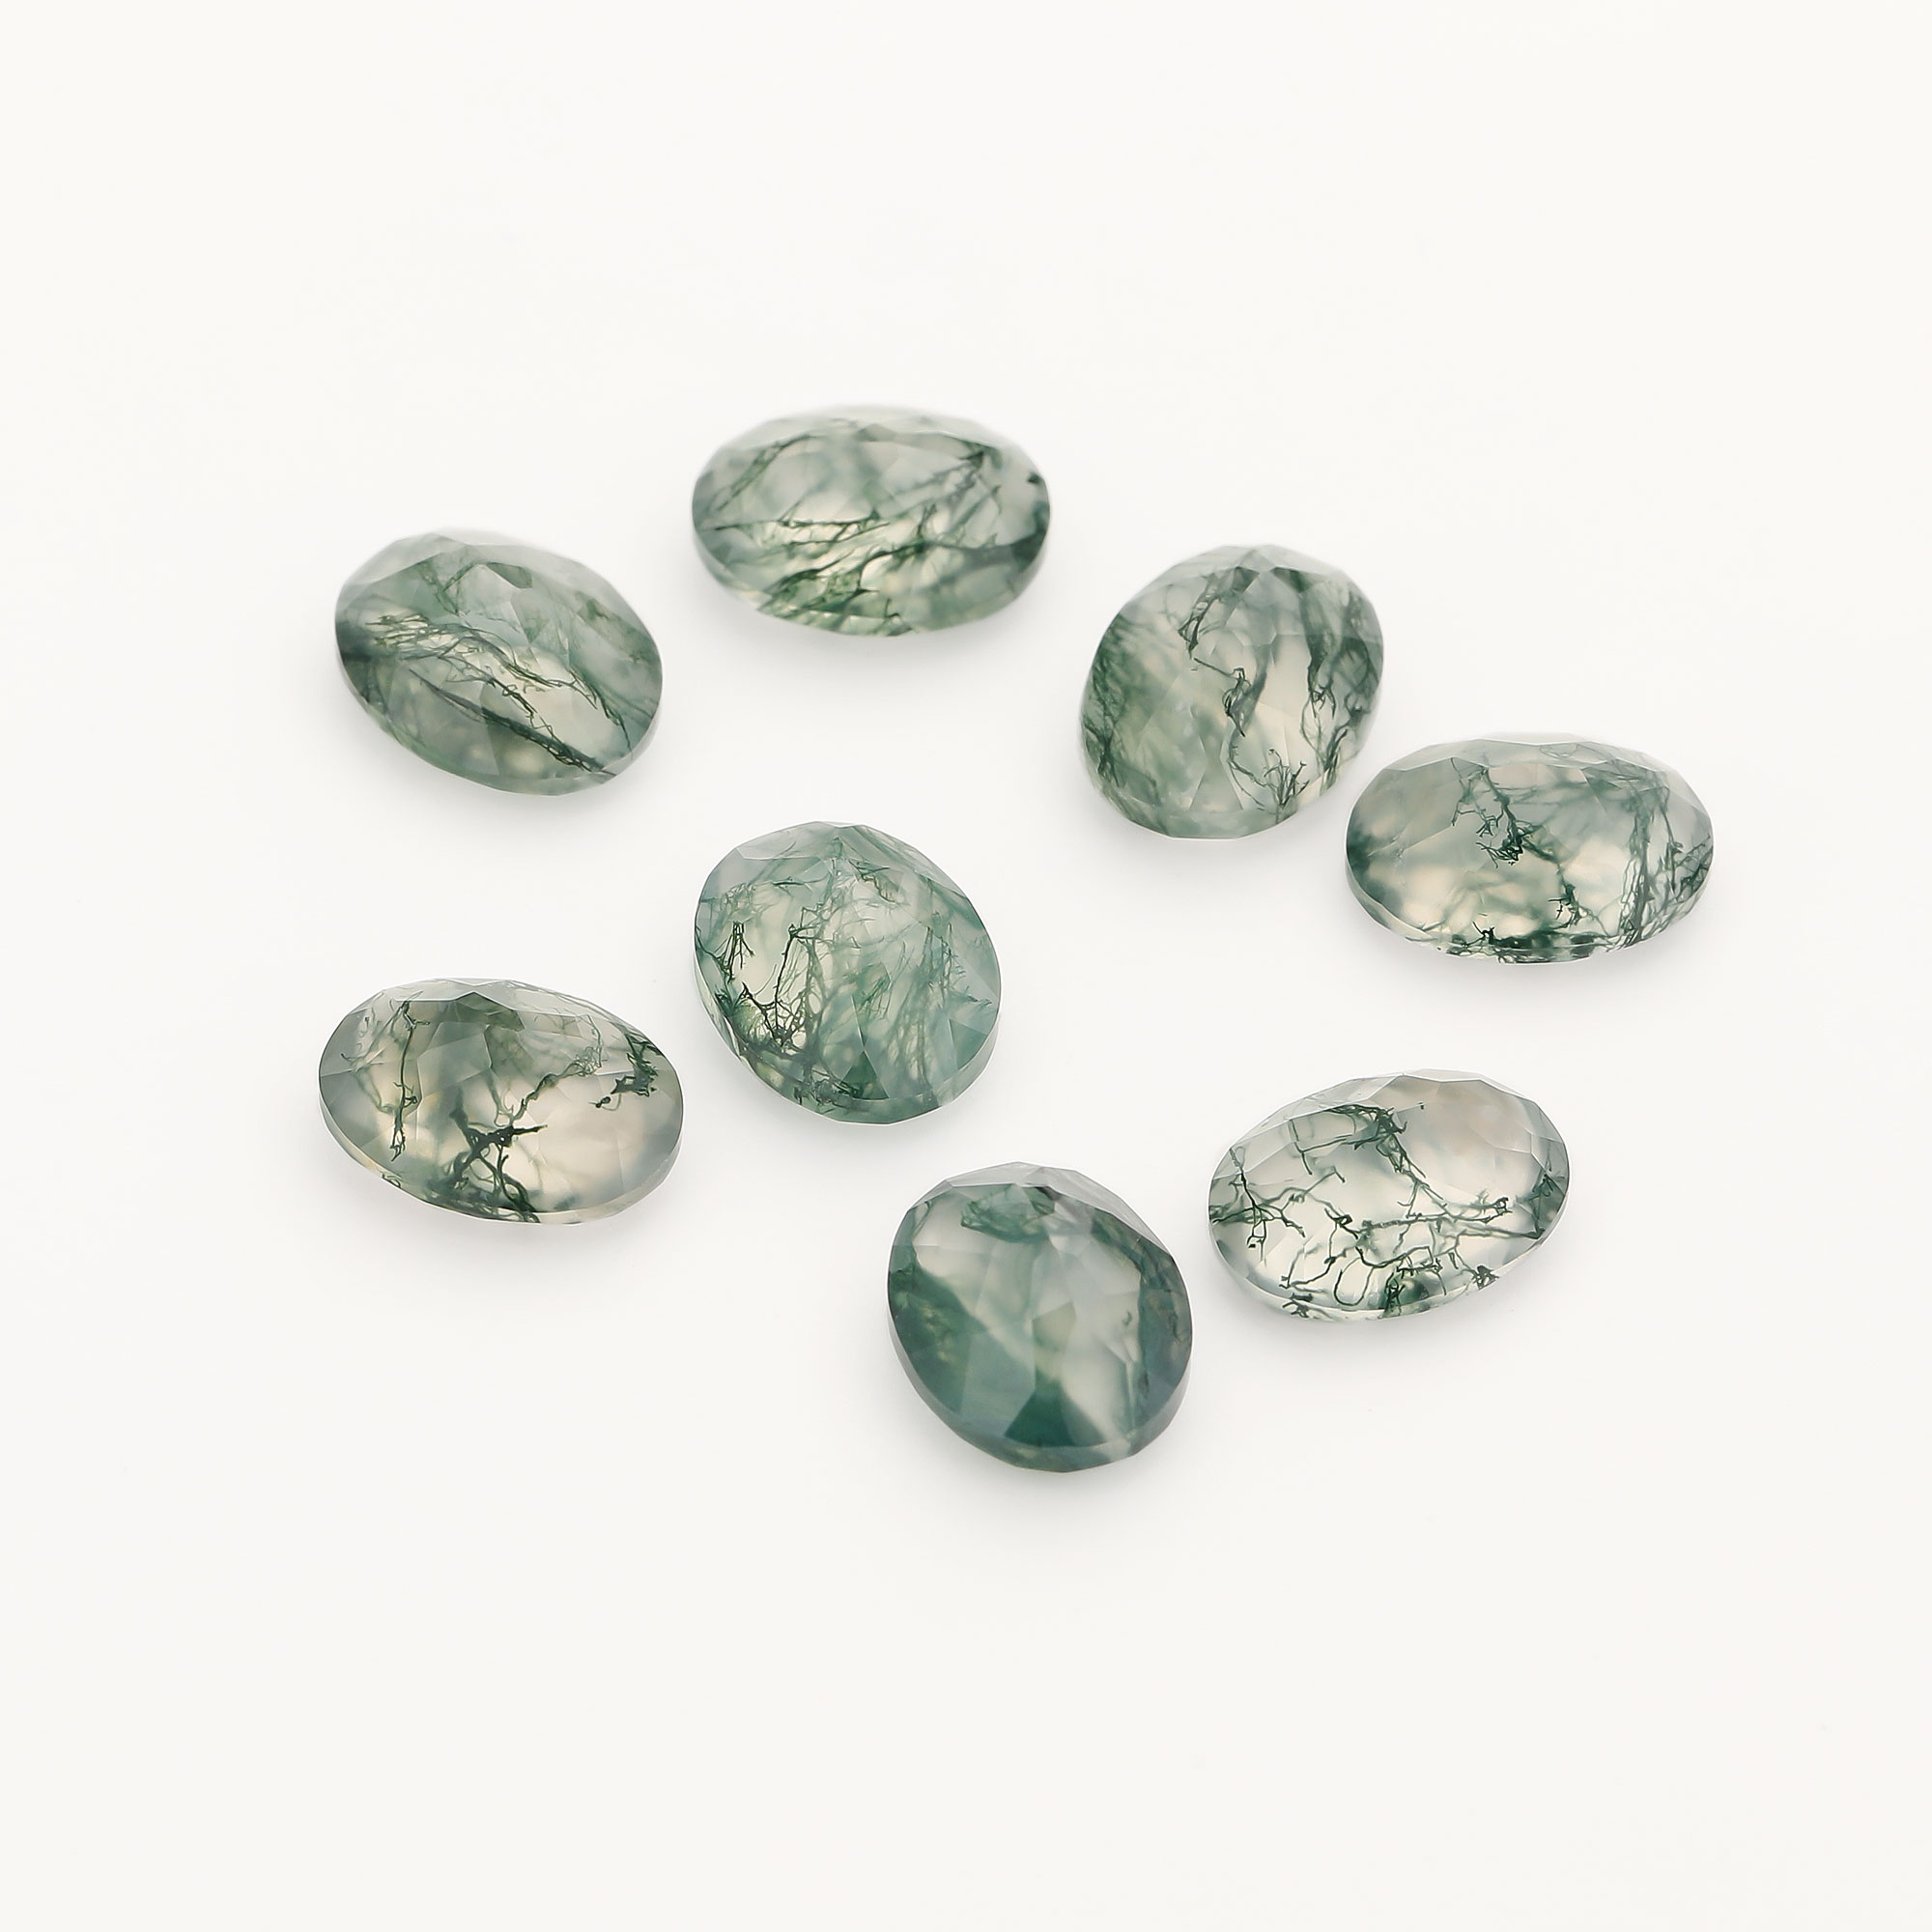 1Pcs 7x9MM Green Moss Agate Oval Faceted Nature Stone,Semi-precious Gemstone,Unique Gemstone,DIY Jewelry Supplies 4120143 - Click Image to Close